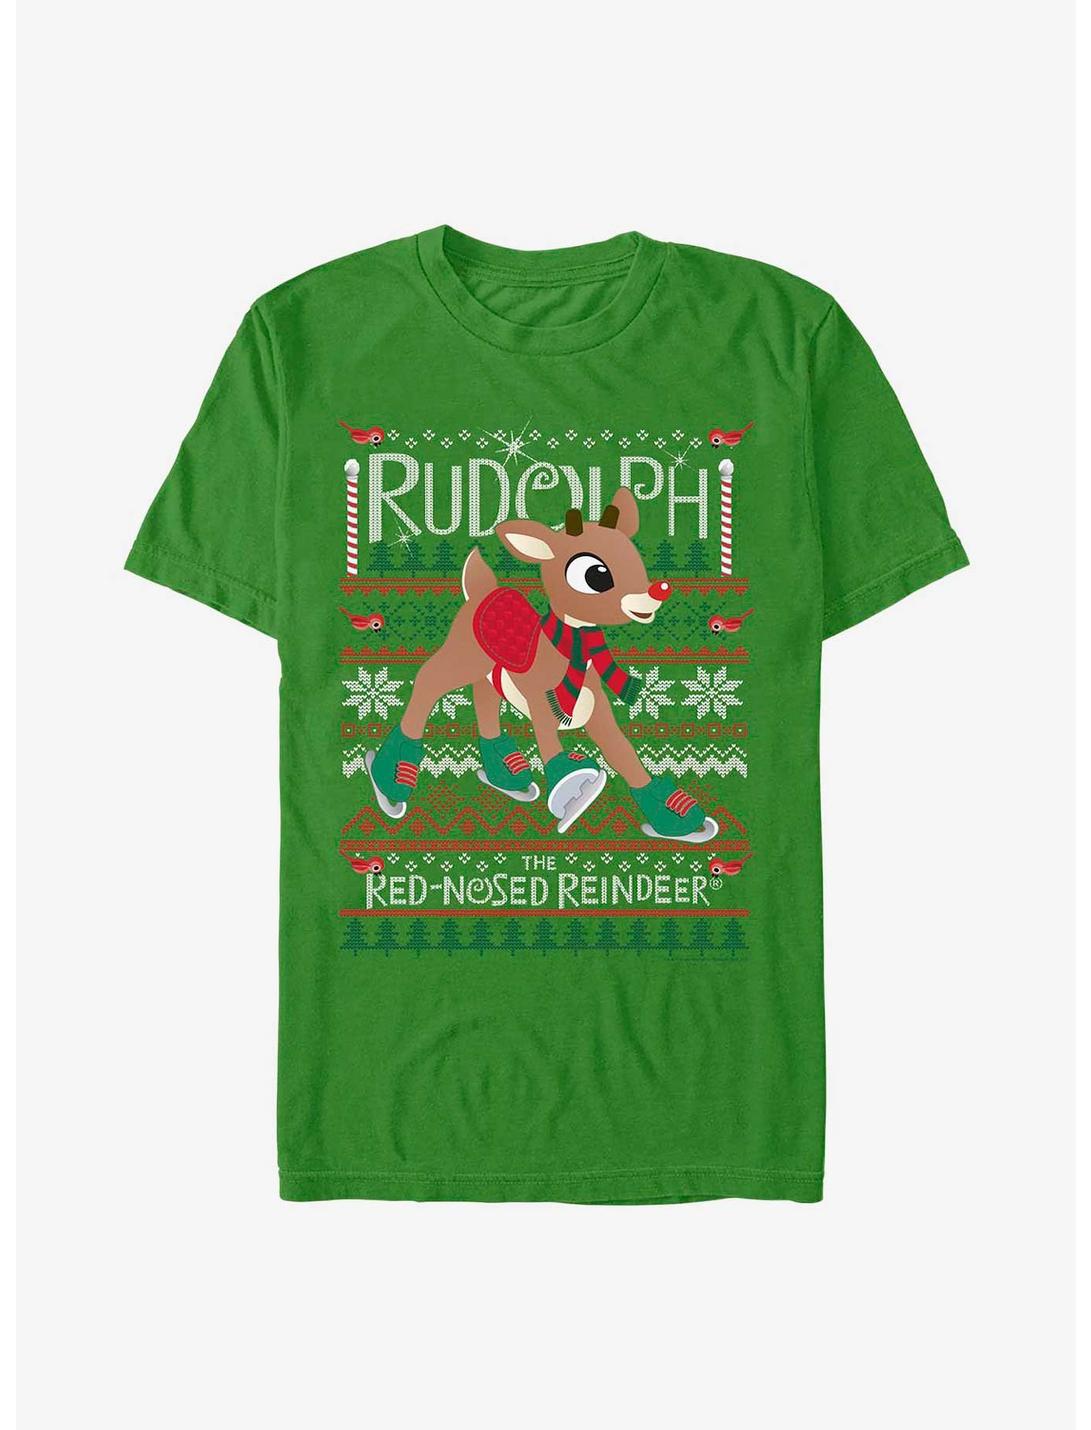 Rudolph The Red-Nosed Reindeer Ugly Sweater T-Shirt, KELLY, hi-res